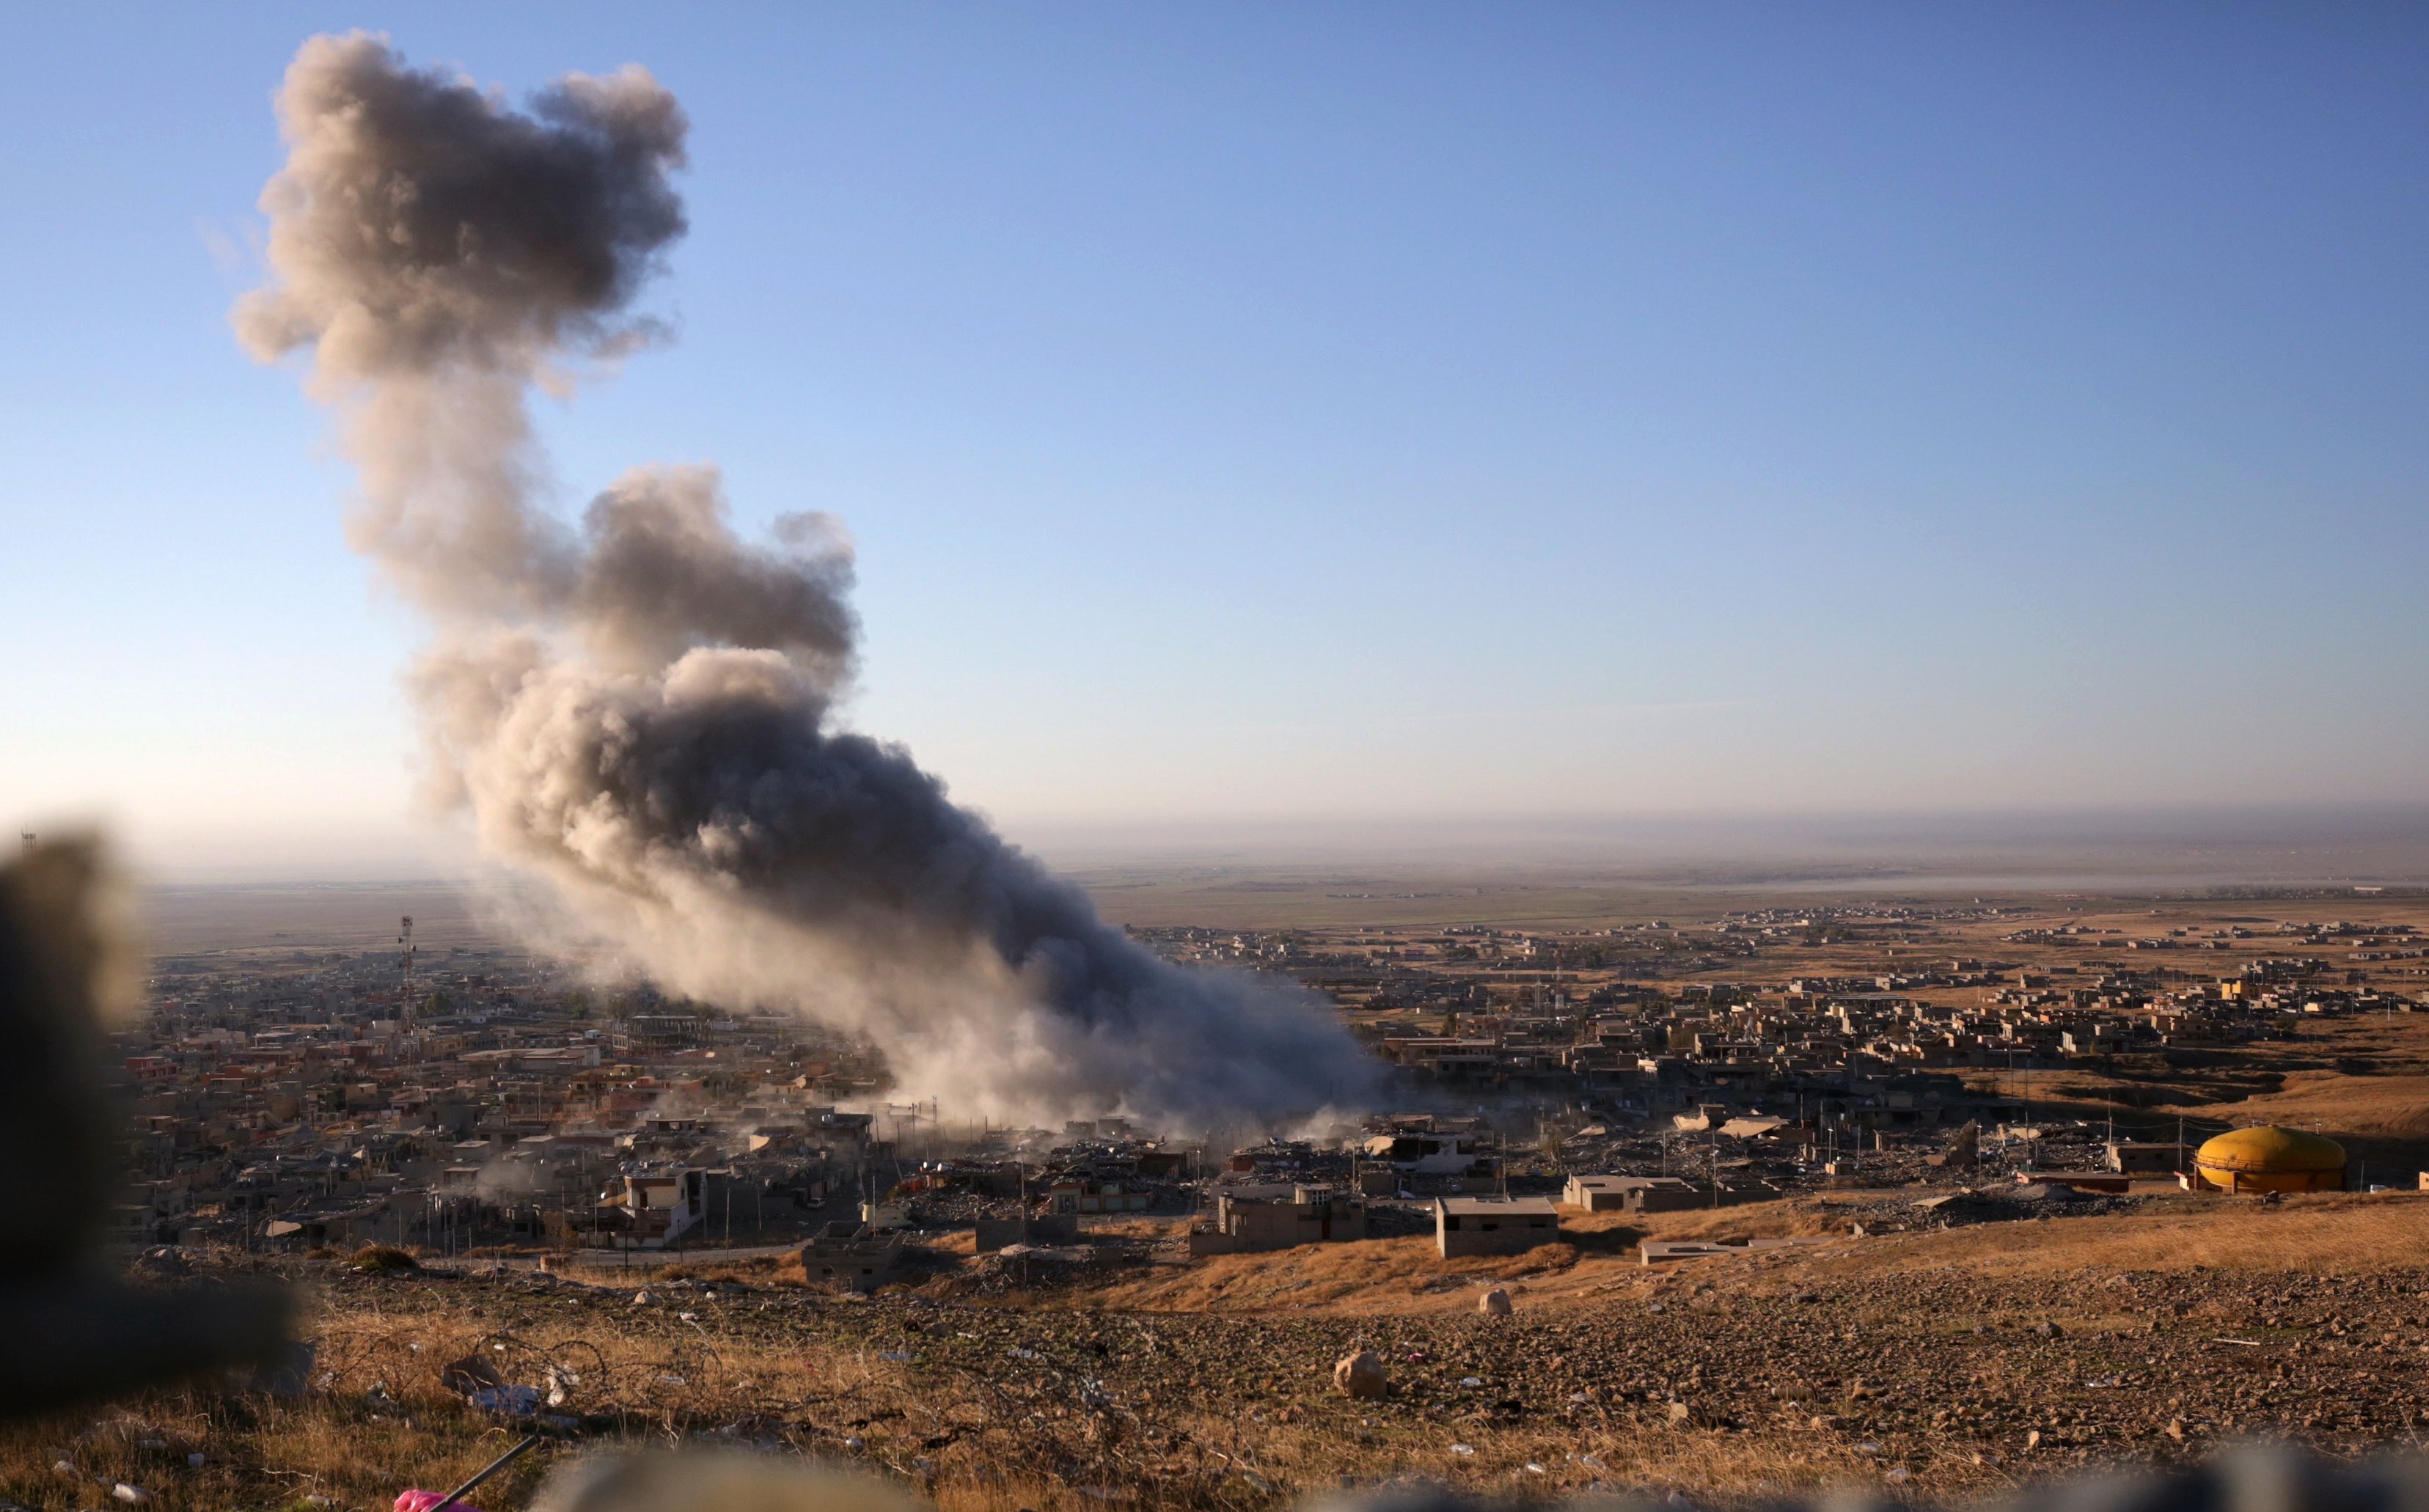 Smoke believed to be from an airstrike billows over the northern Iraqi town of Sinjar, Nov. 12, 2015. (Bram Janssen—AP)